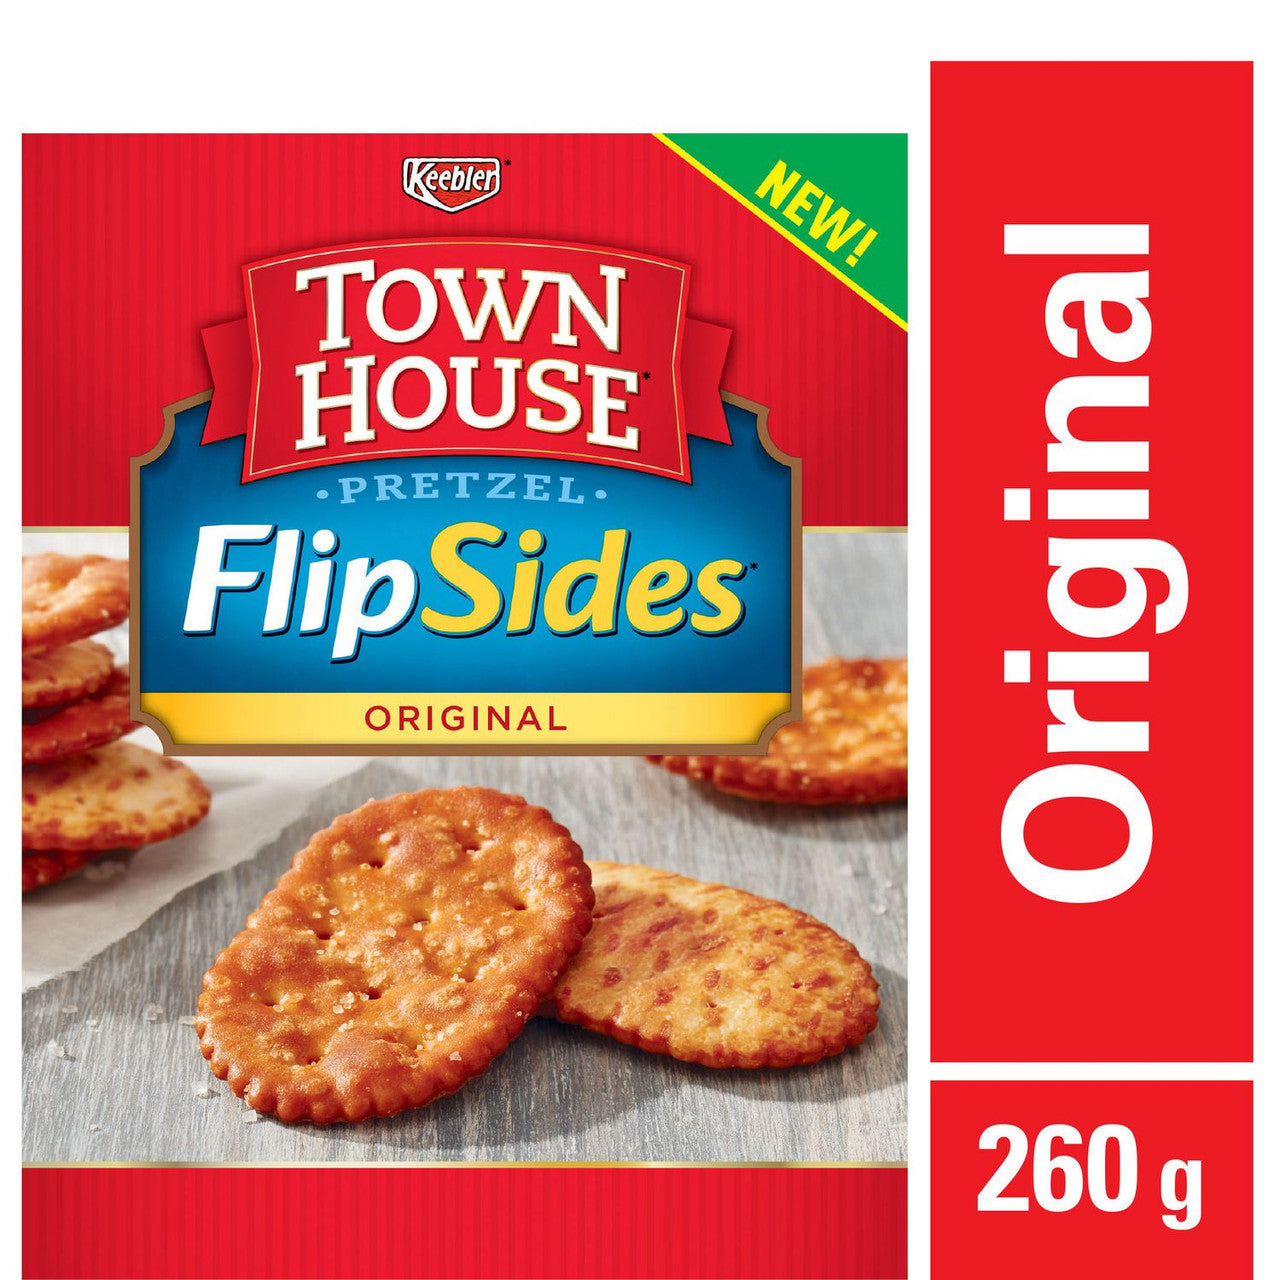 Keebler Town House Flipsides Original Crackers, 260g/9.2 oz., {Imported from Canada}